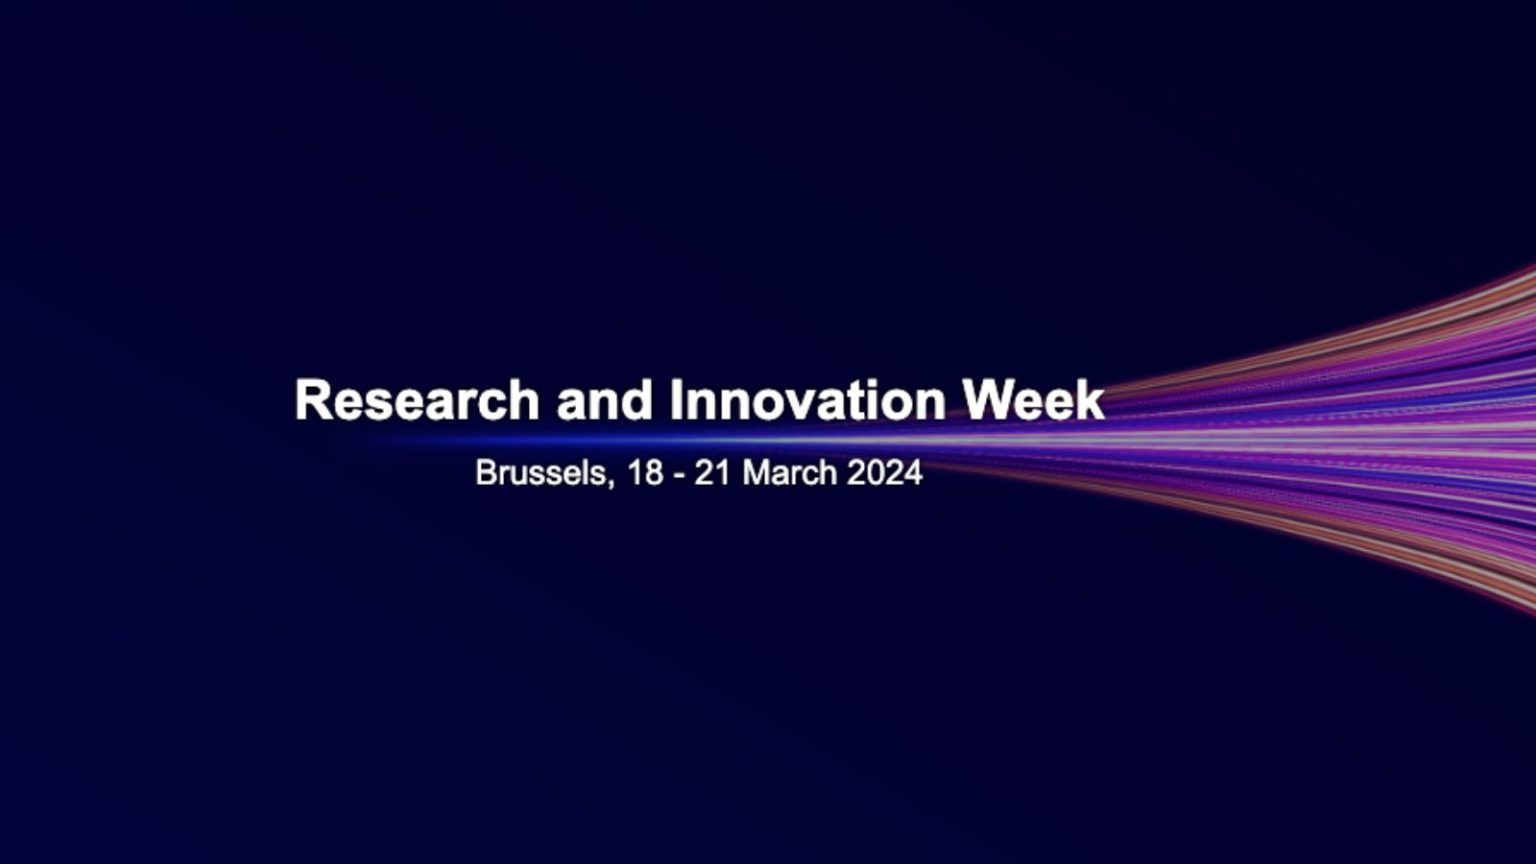 Watch out Research & Innovation Week 2024 is coming! CCAM